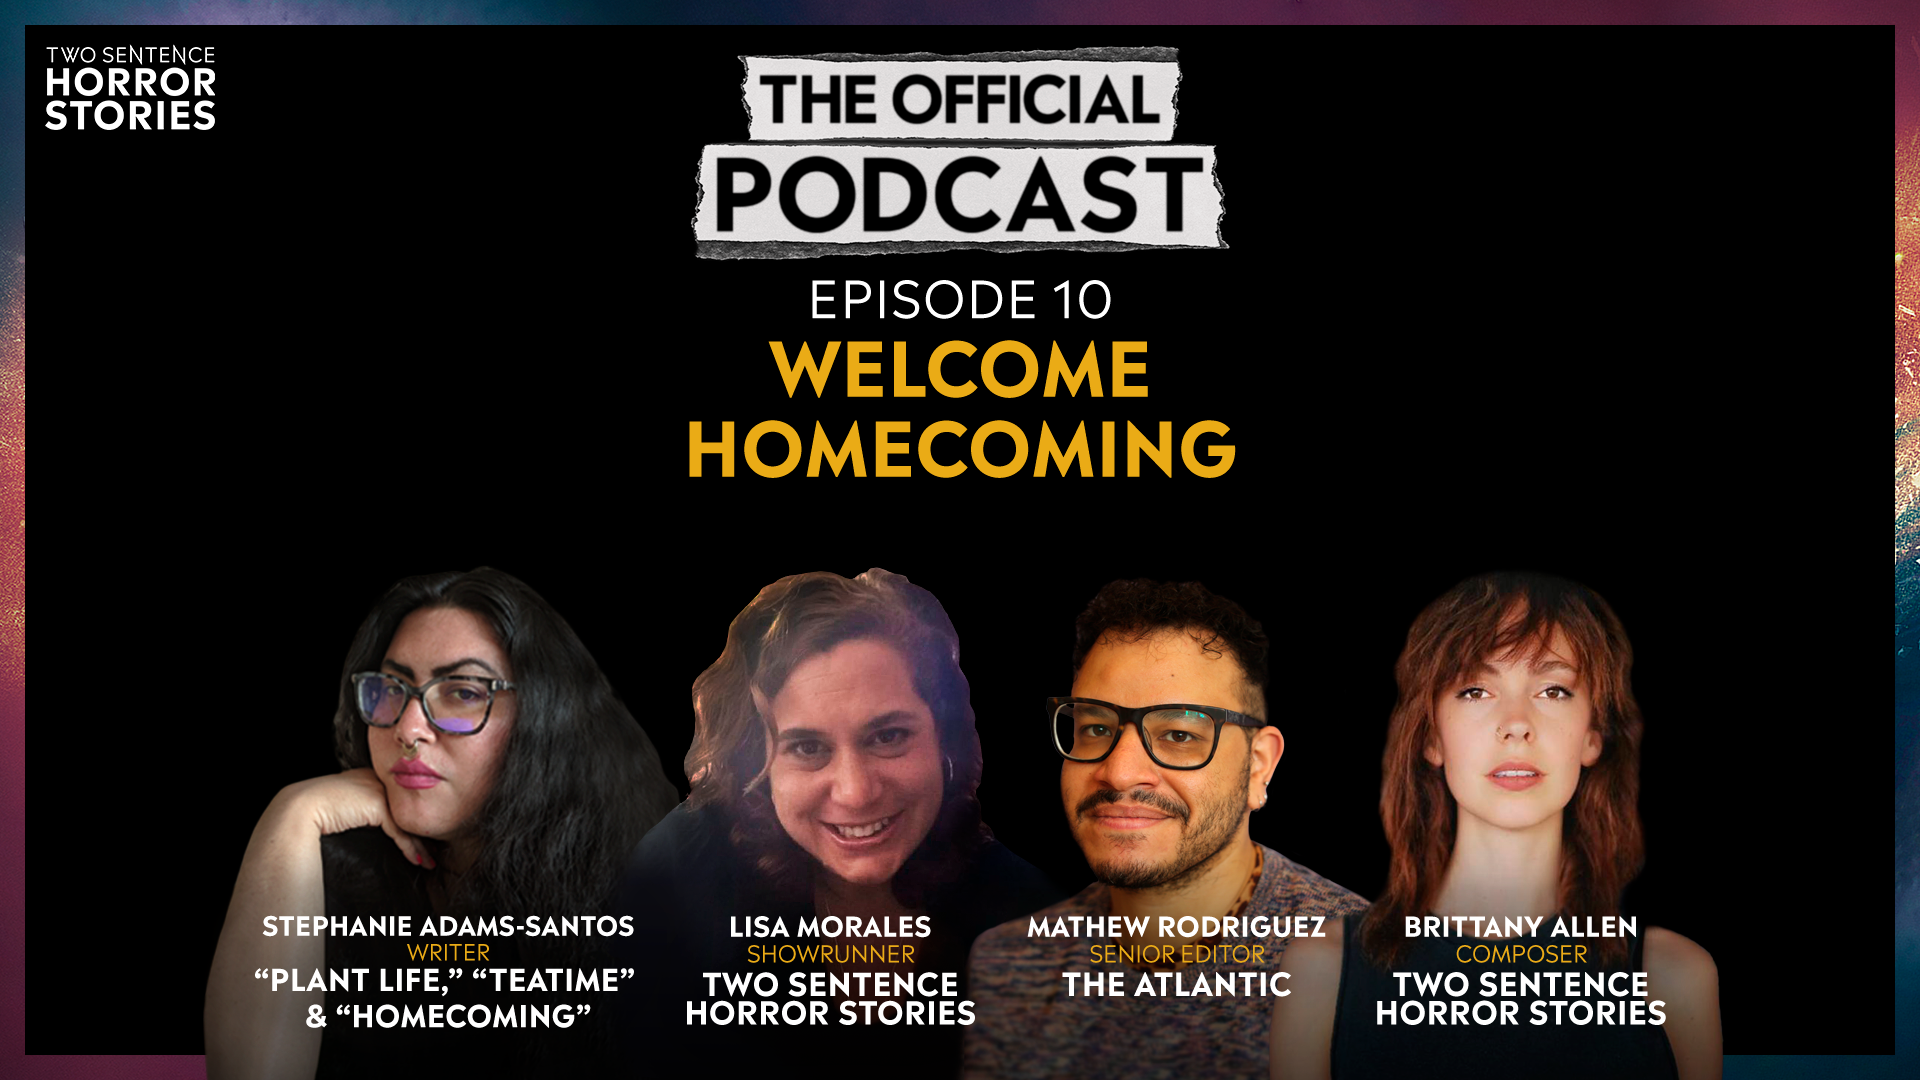 Ep 10. Welcome Homecoming (With Guests Lisa Morales, Stephanie Adams-Santos, Brittany Allen and Mathew Rodriguez!)